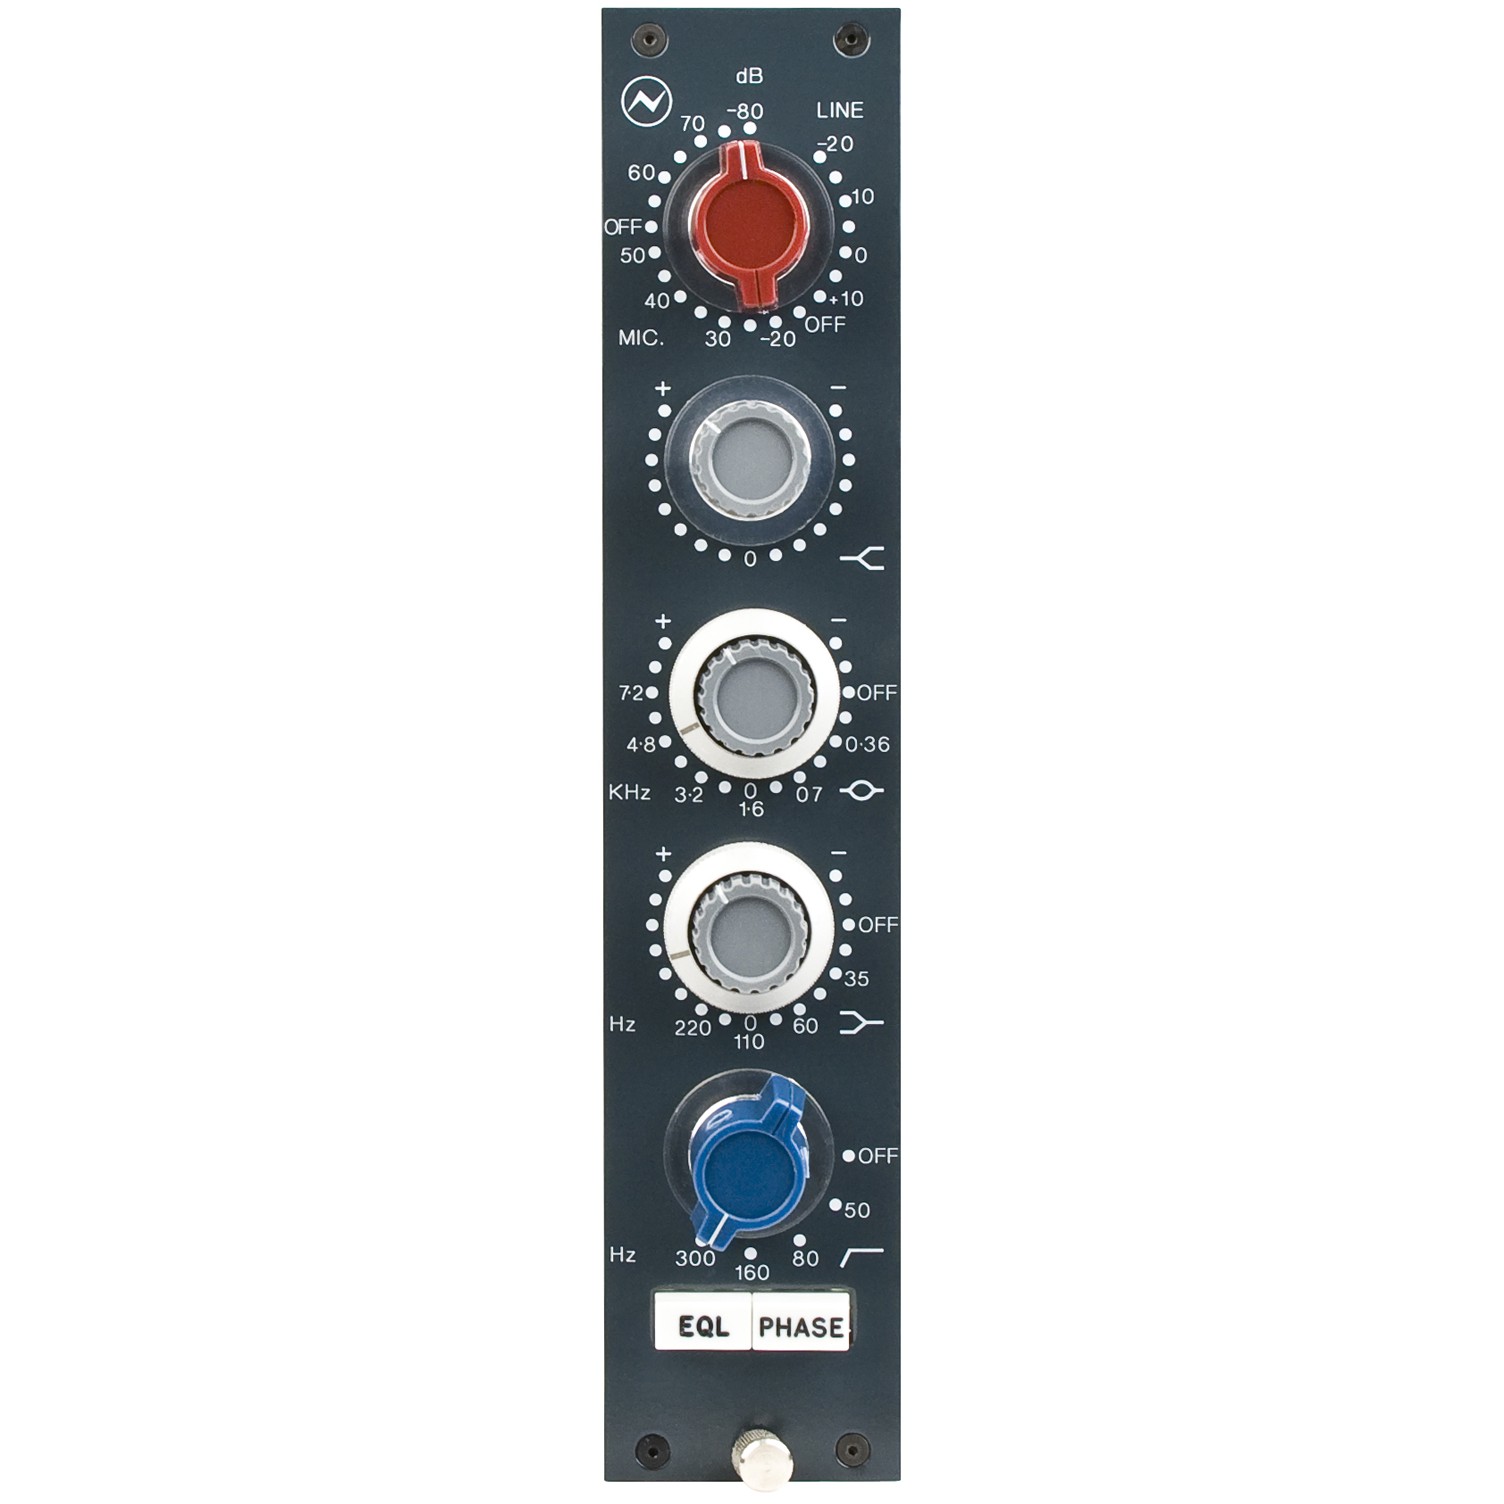 Neve 1073 CV - Vintage King Pro Audio Outfitter